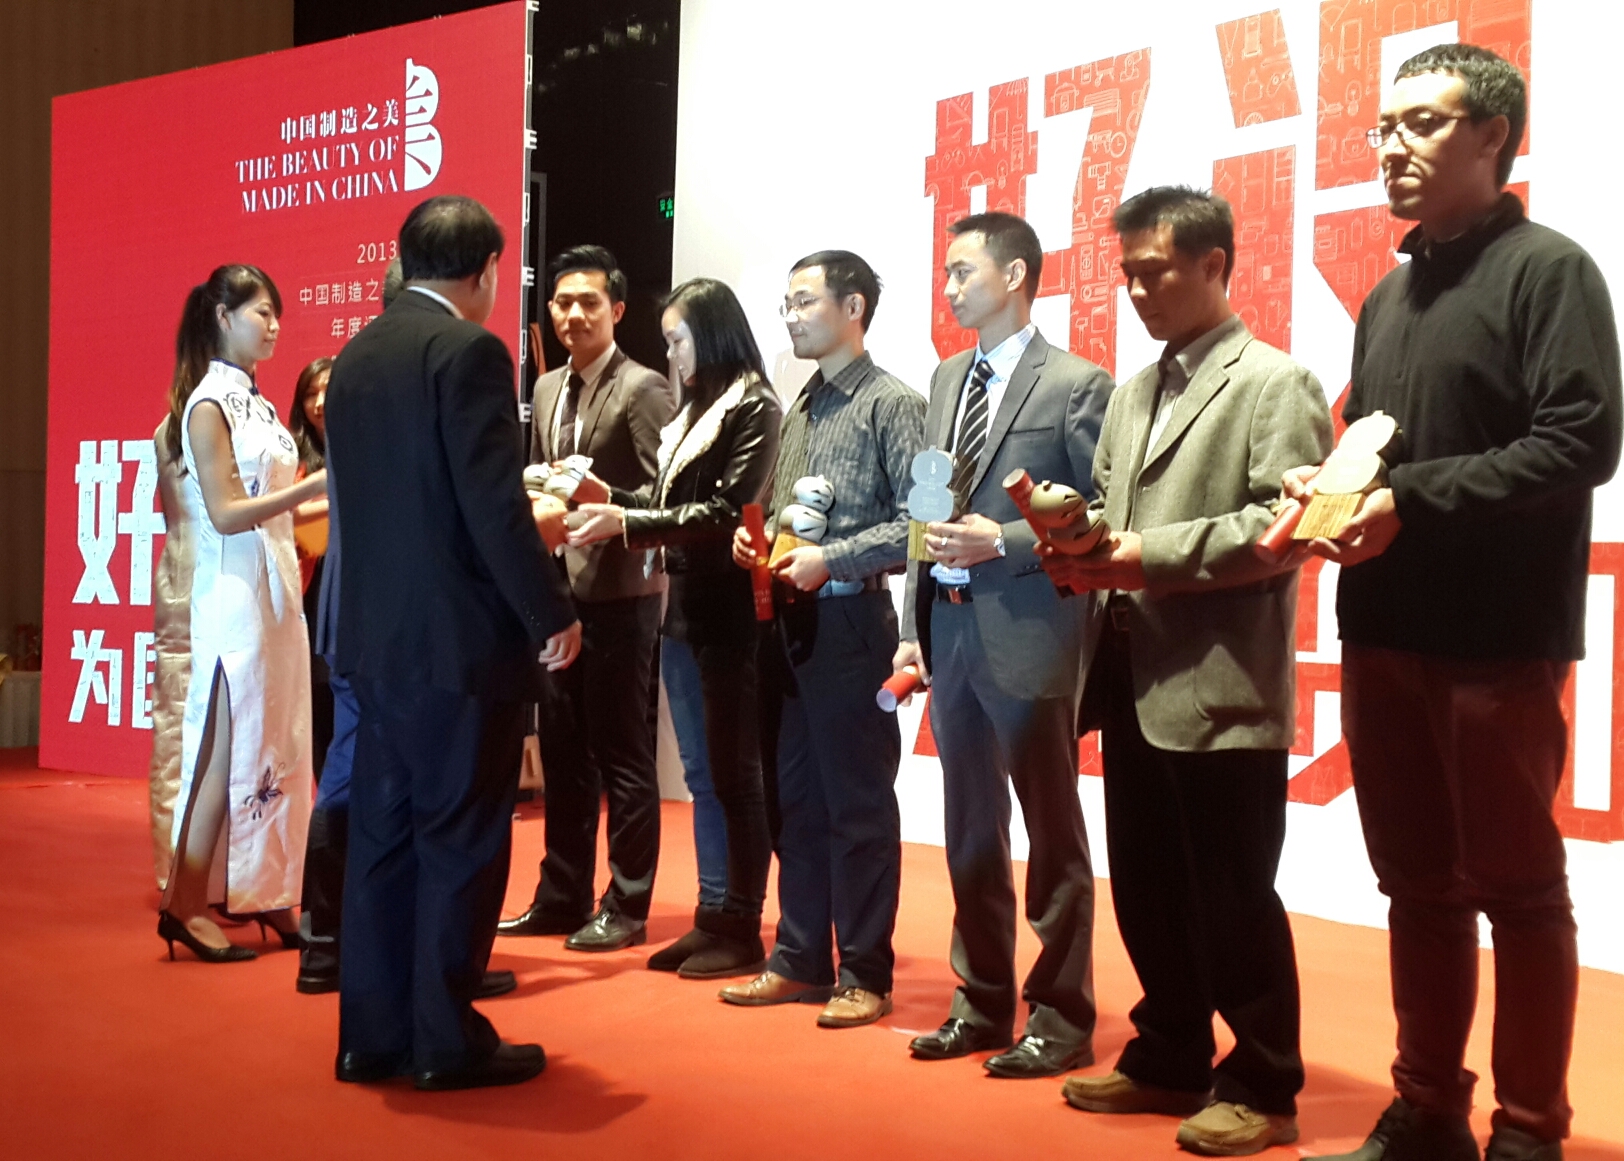 2013 Awards Ceremony of "The Beauty of Made in China"_2